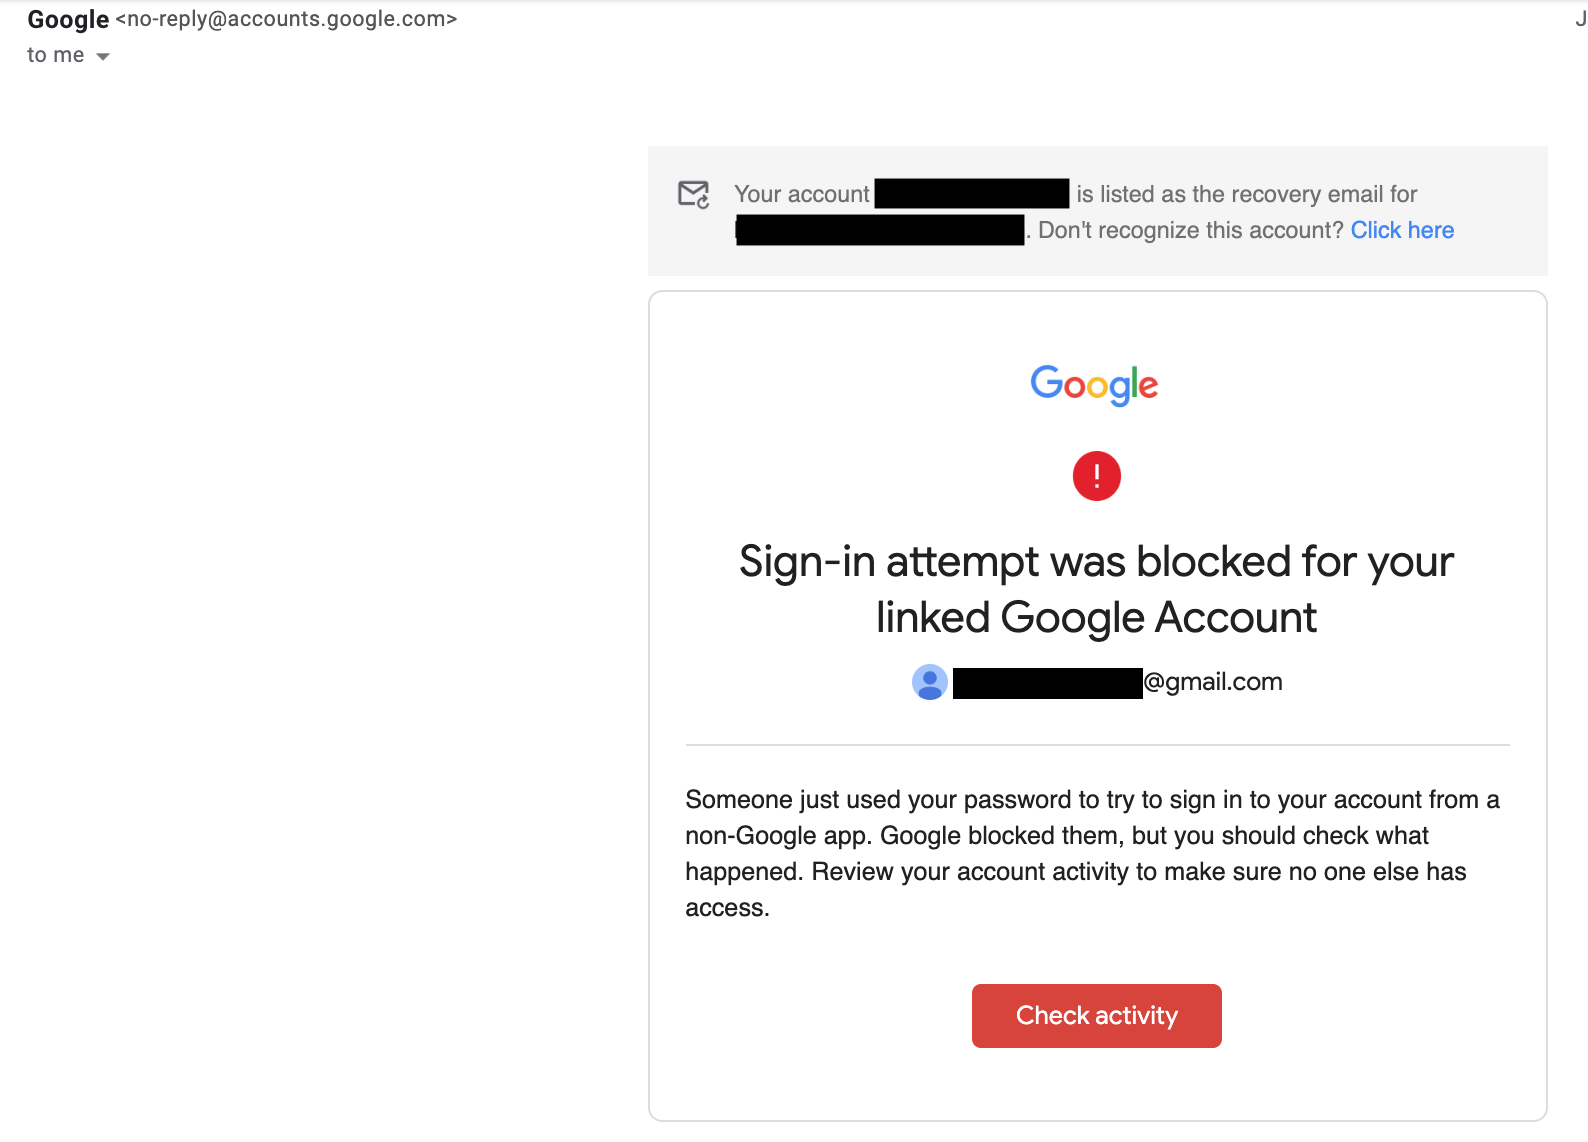 Suspicious Activity On My Account But Unable To Log In Google